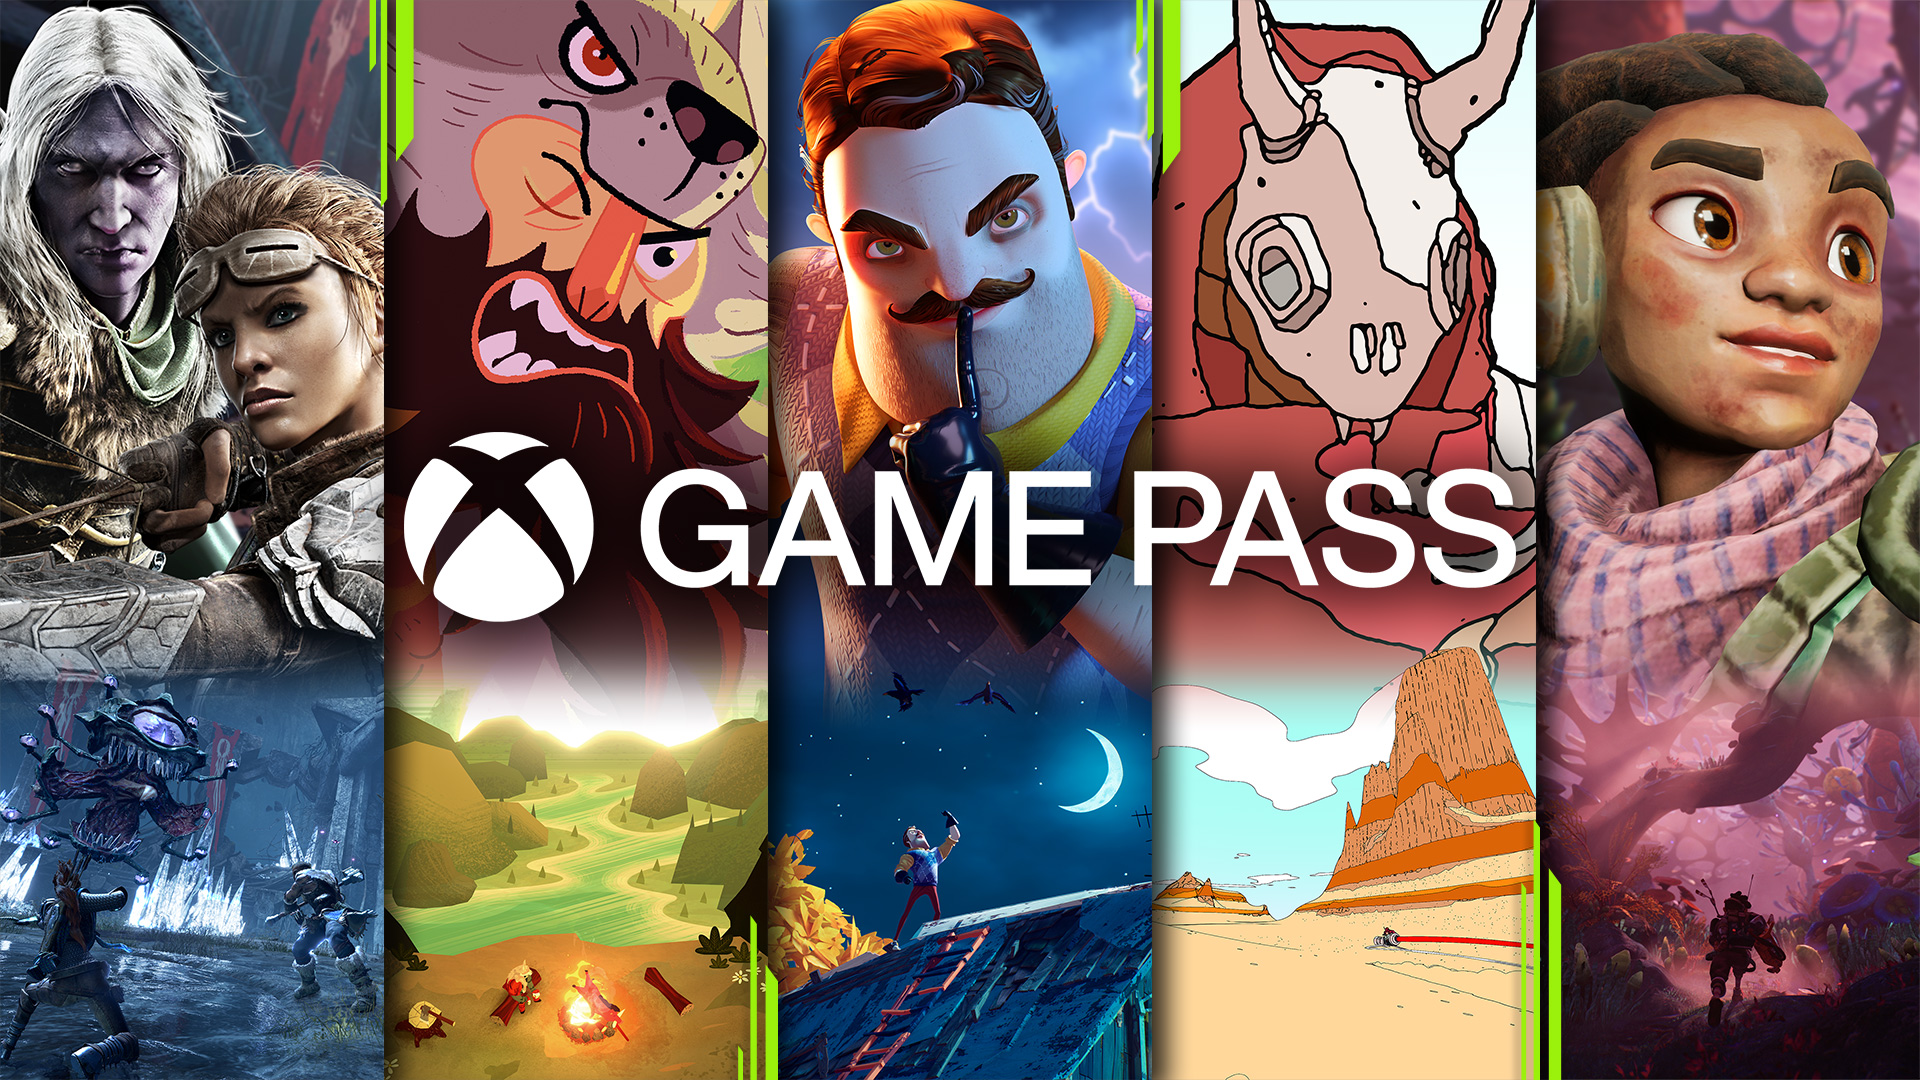 Xbox Game Pass Ultimate 1 Month, Xboxgames sub - MMOGA